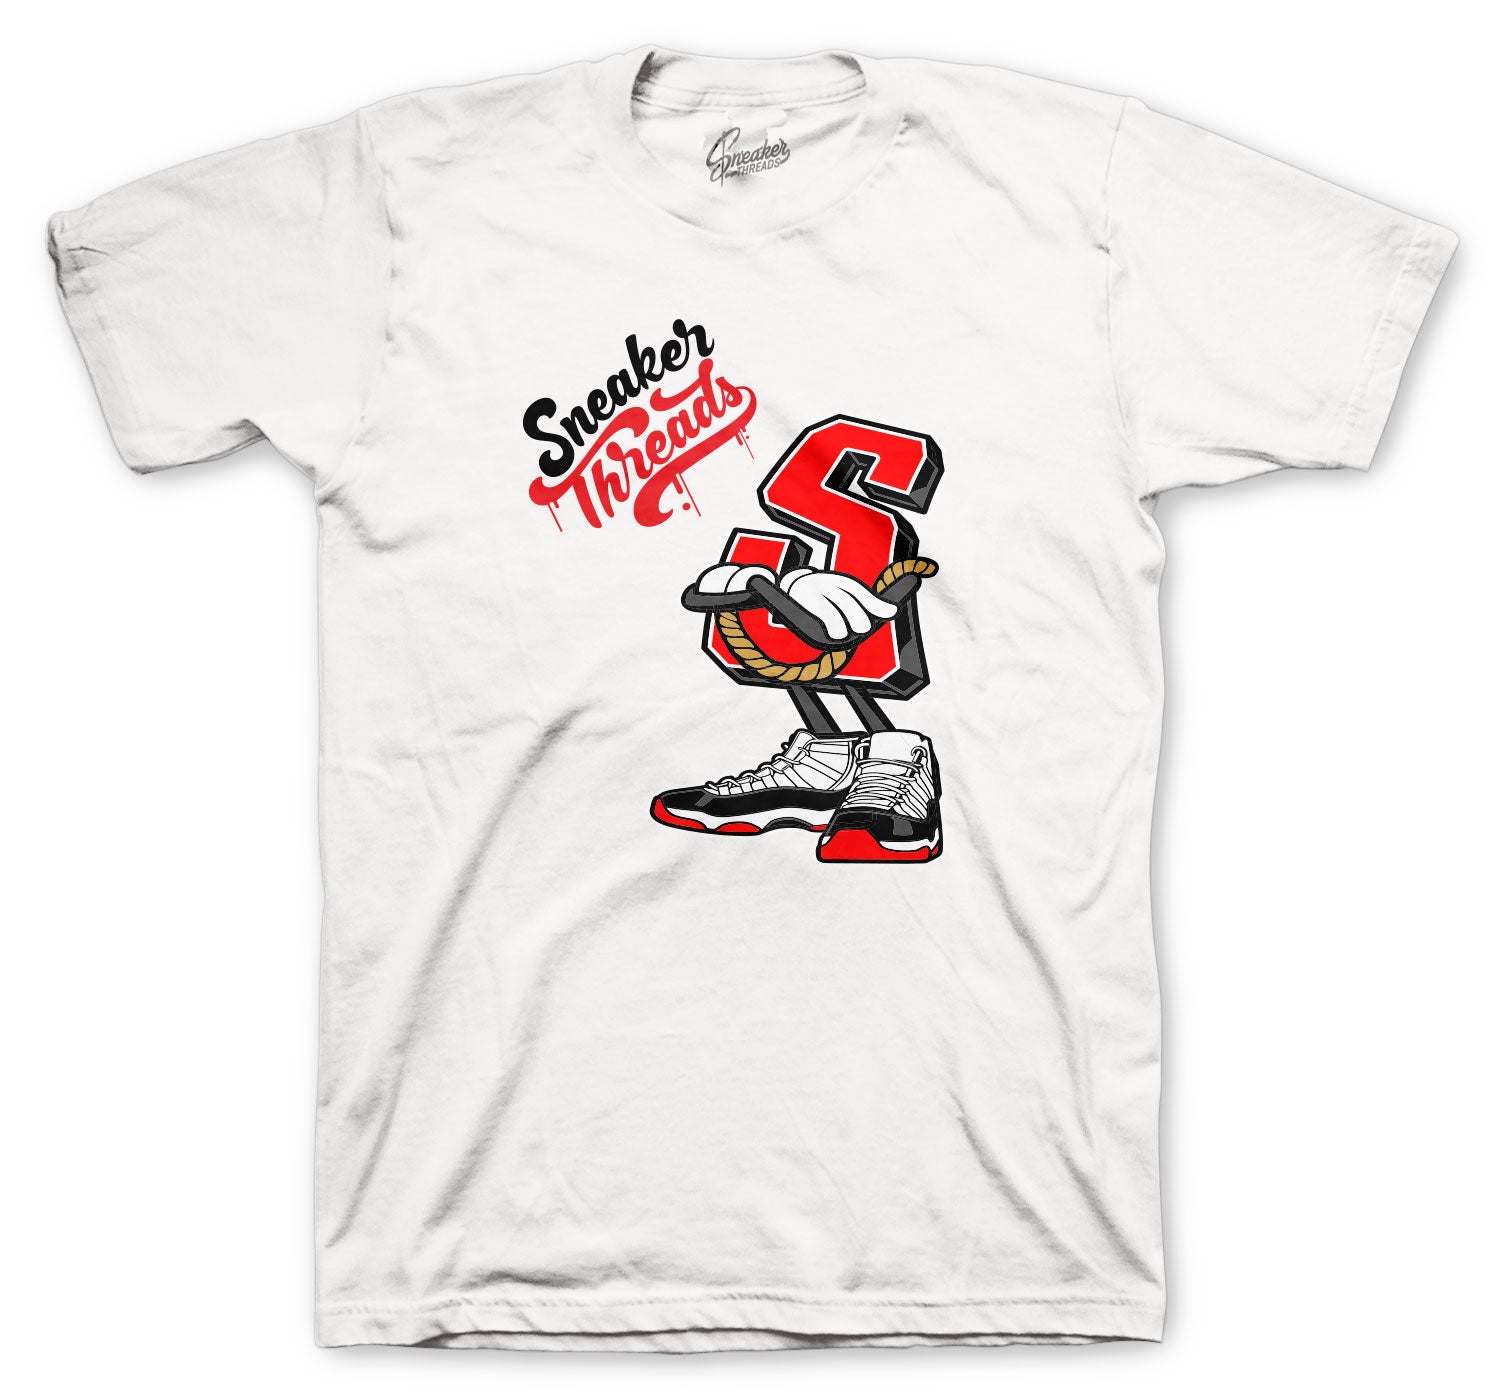 Jordan 11 bred concord goes with tees